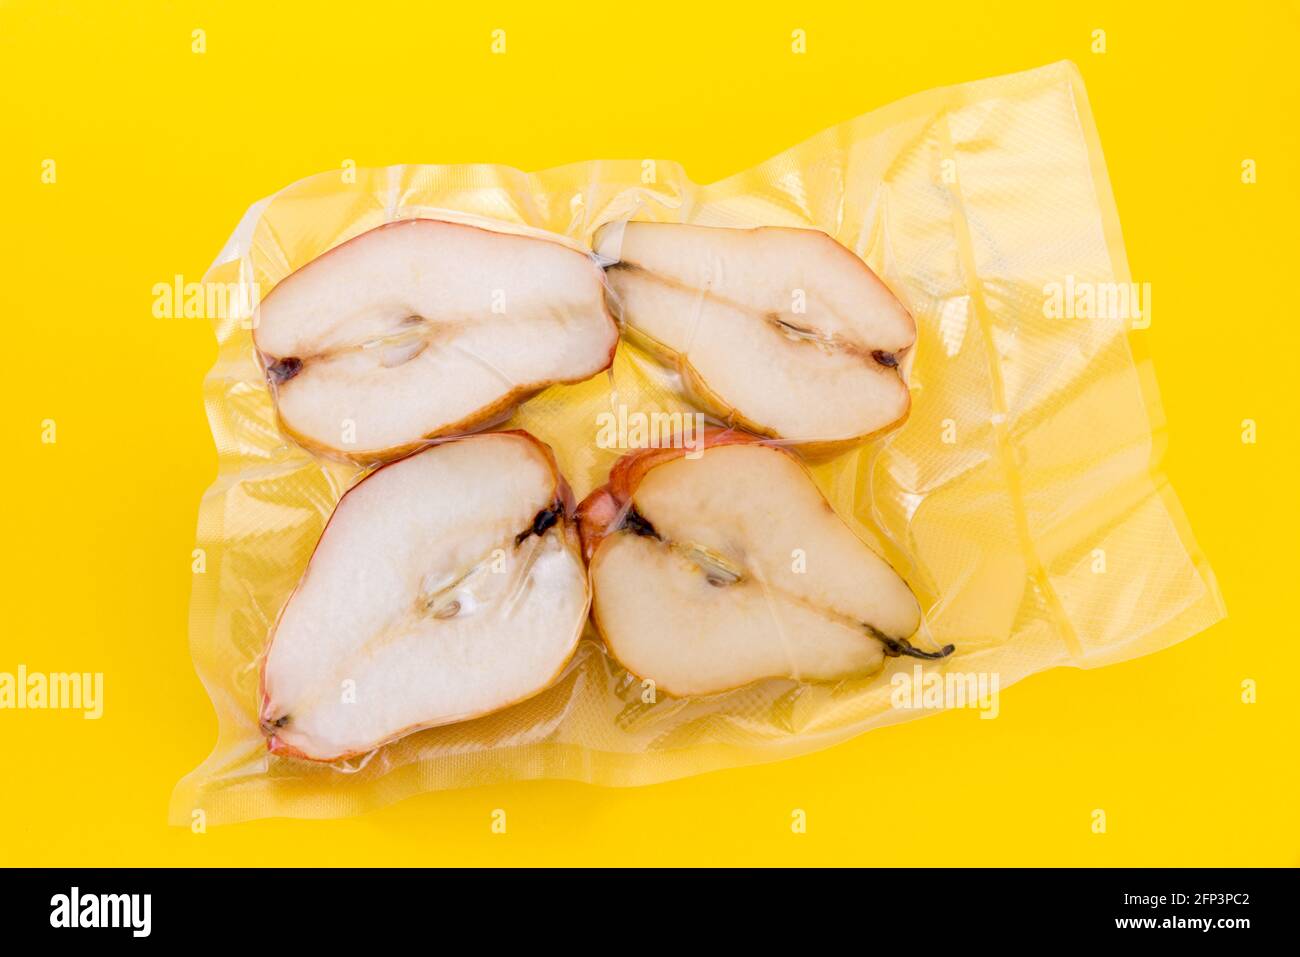 Pears cut in half in vacuum sealed for sous vide cooking, isolated on yellow background Stock Photo